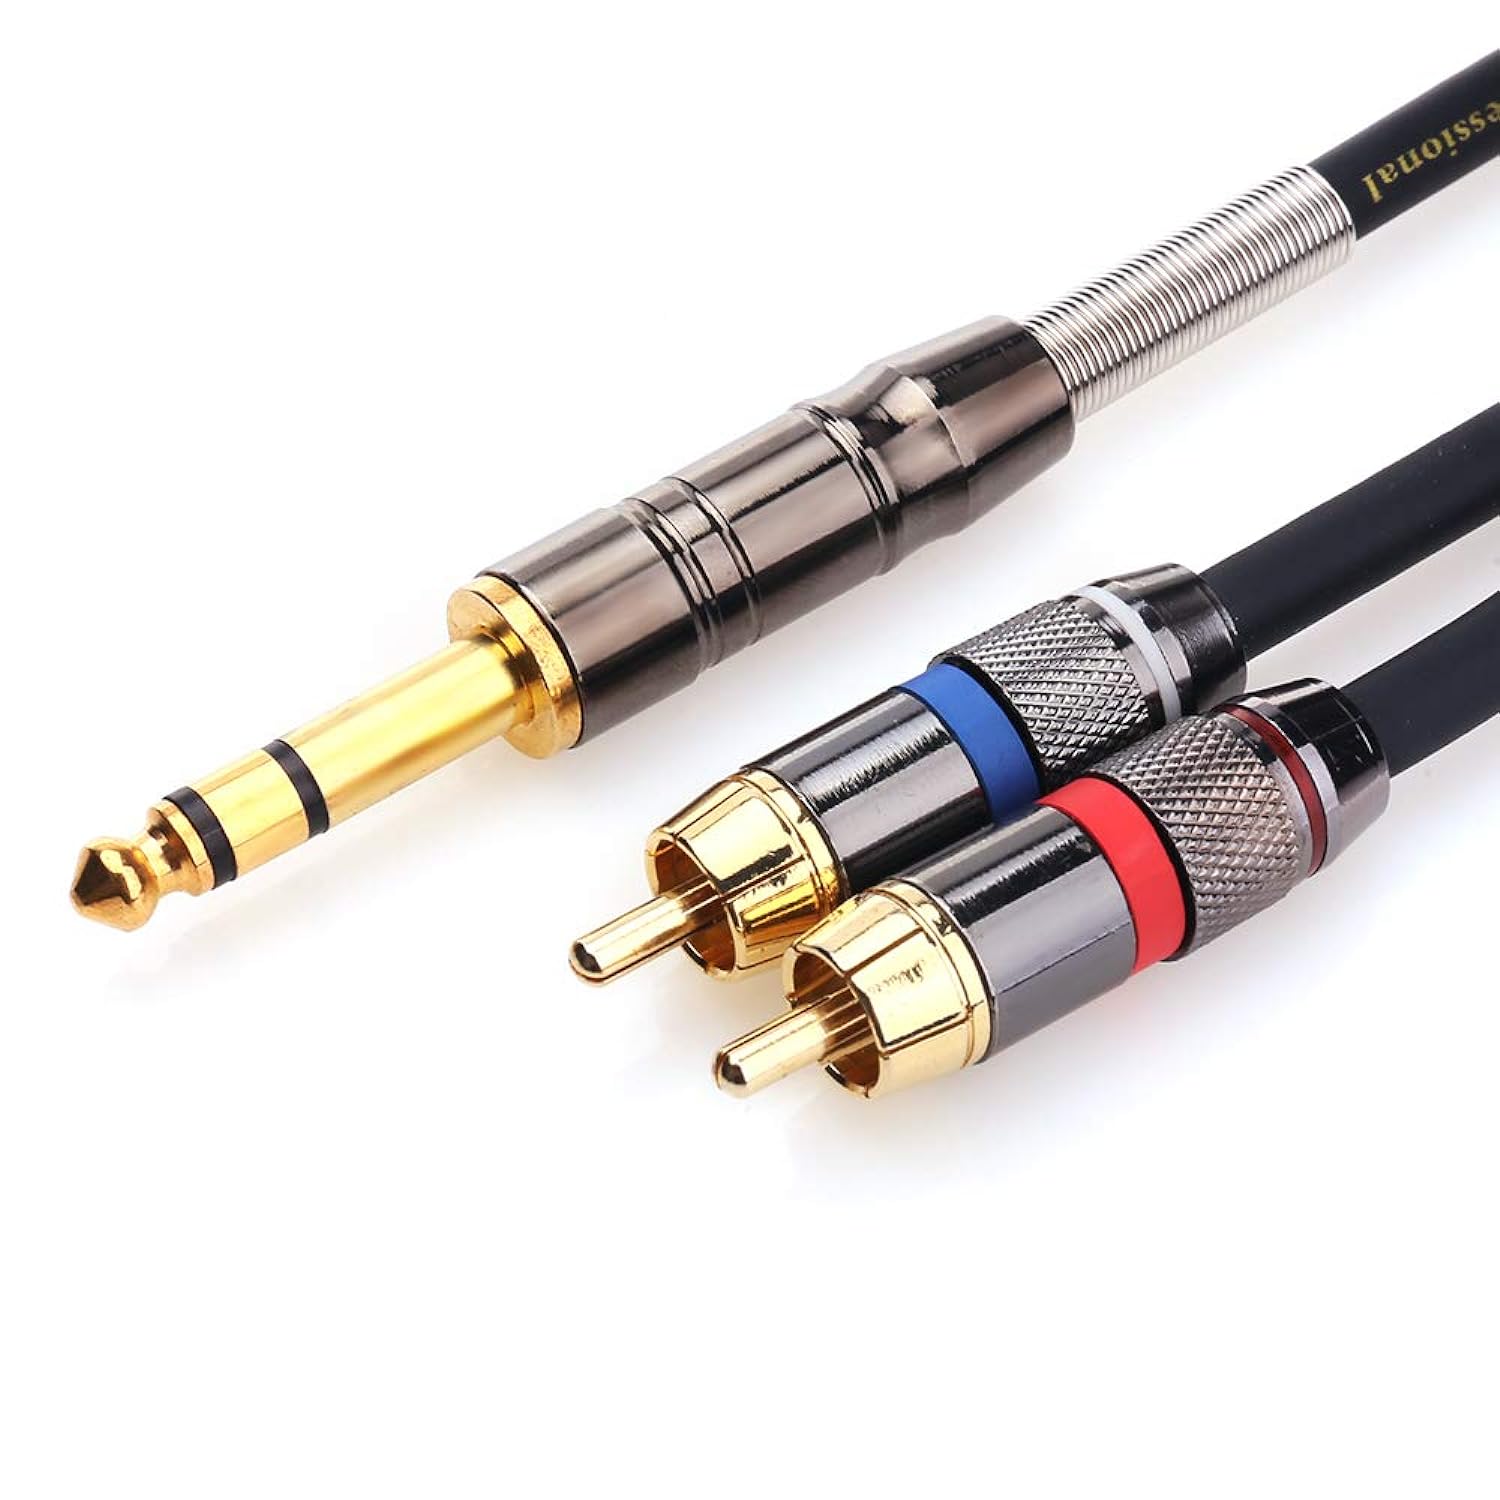 Great Choice Products Rca To 1/4 Cable, Quarter Inch Trs To Rca (1/4 Stereo To 2 Rca) Audio Y Splitter Cable Insert Cable - 10 Feet/3 Meters